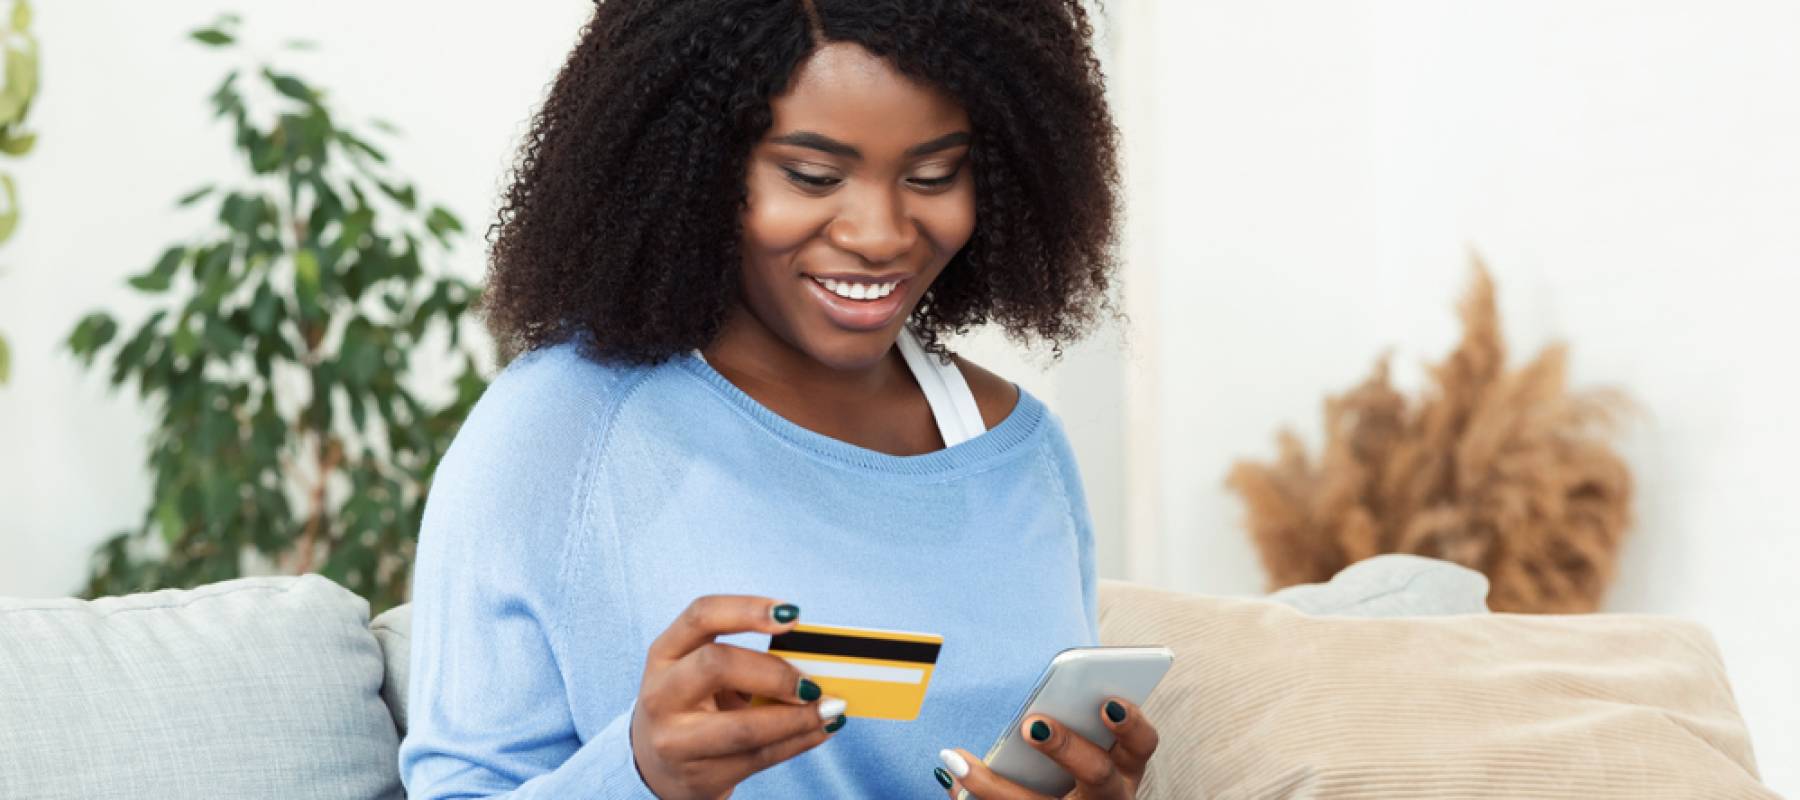 Woman using credit card on mobile phone